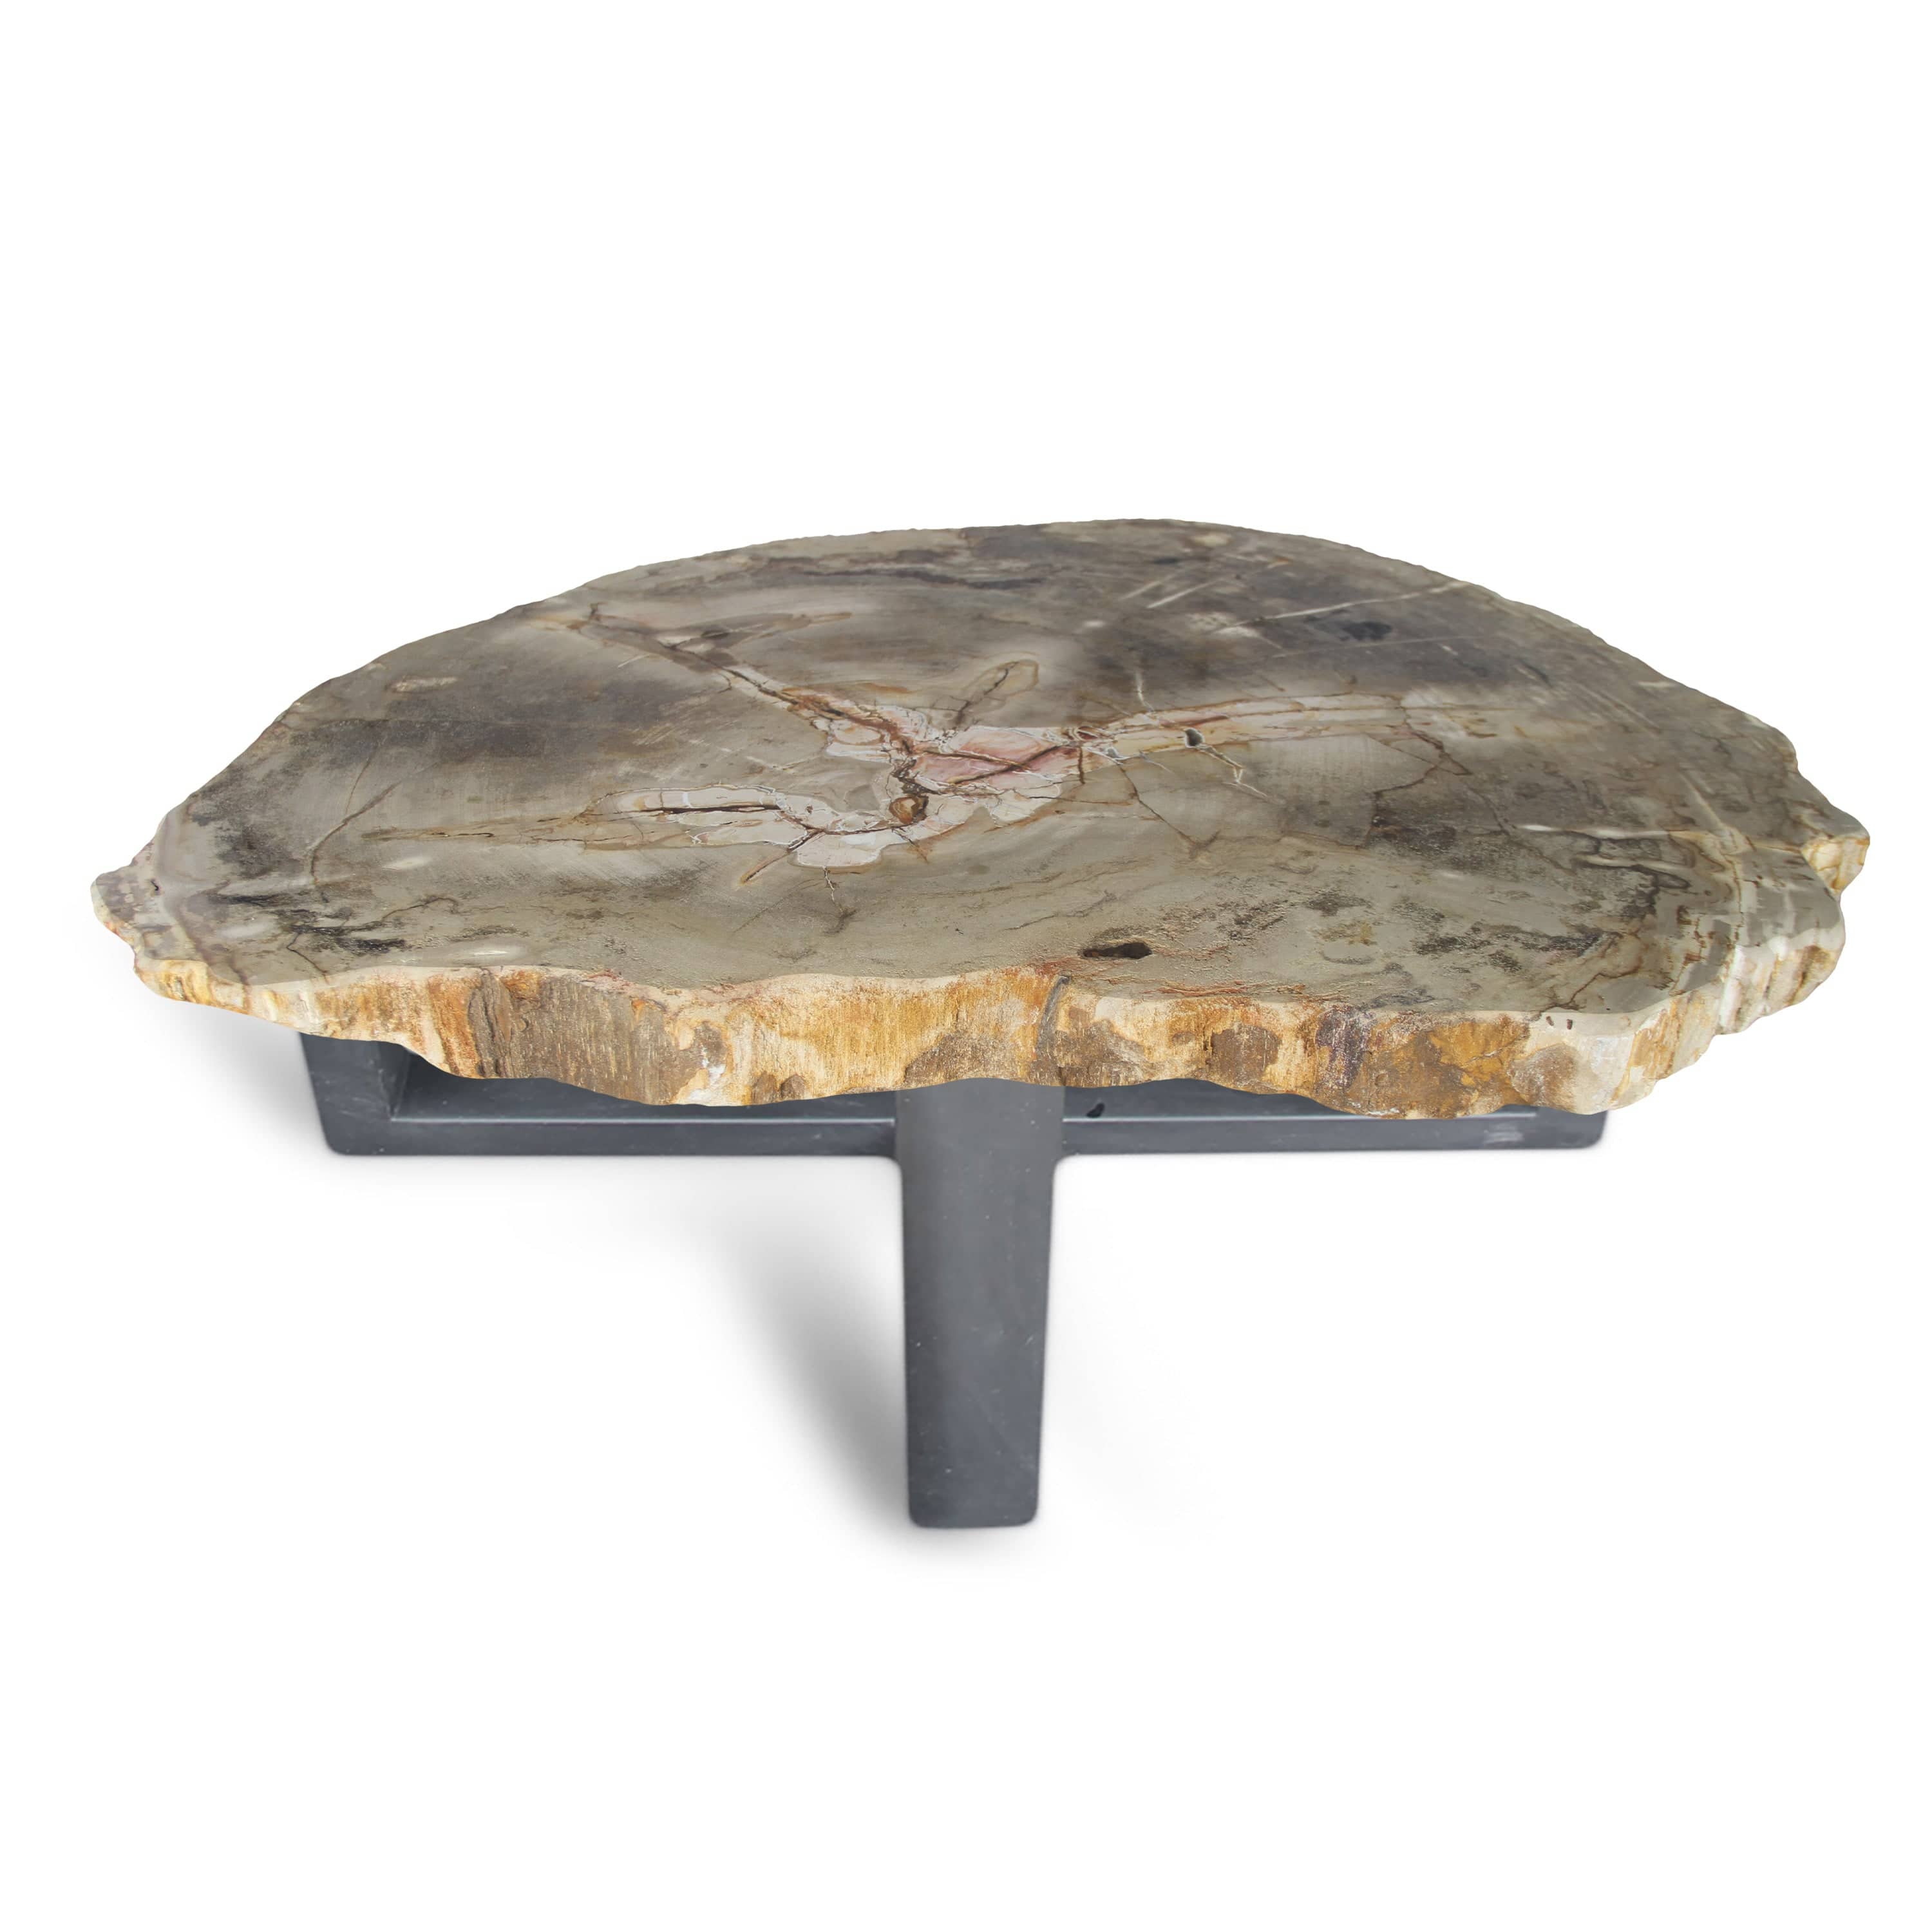 Kalifano Petrified Wood Petrified Wood Round Slab Coffee Table from Indonesia - 36" / 158 lbs PWT5800.002